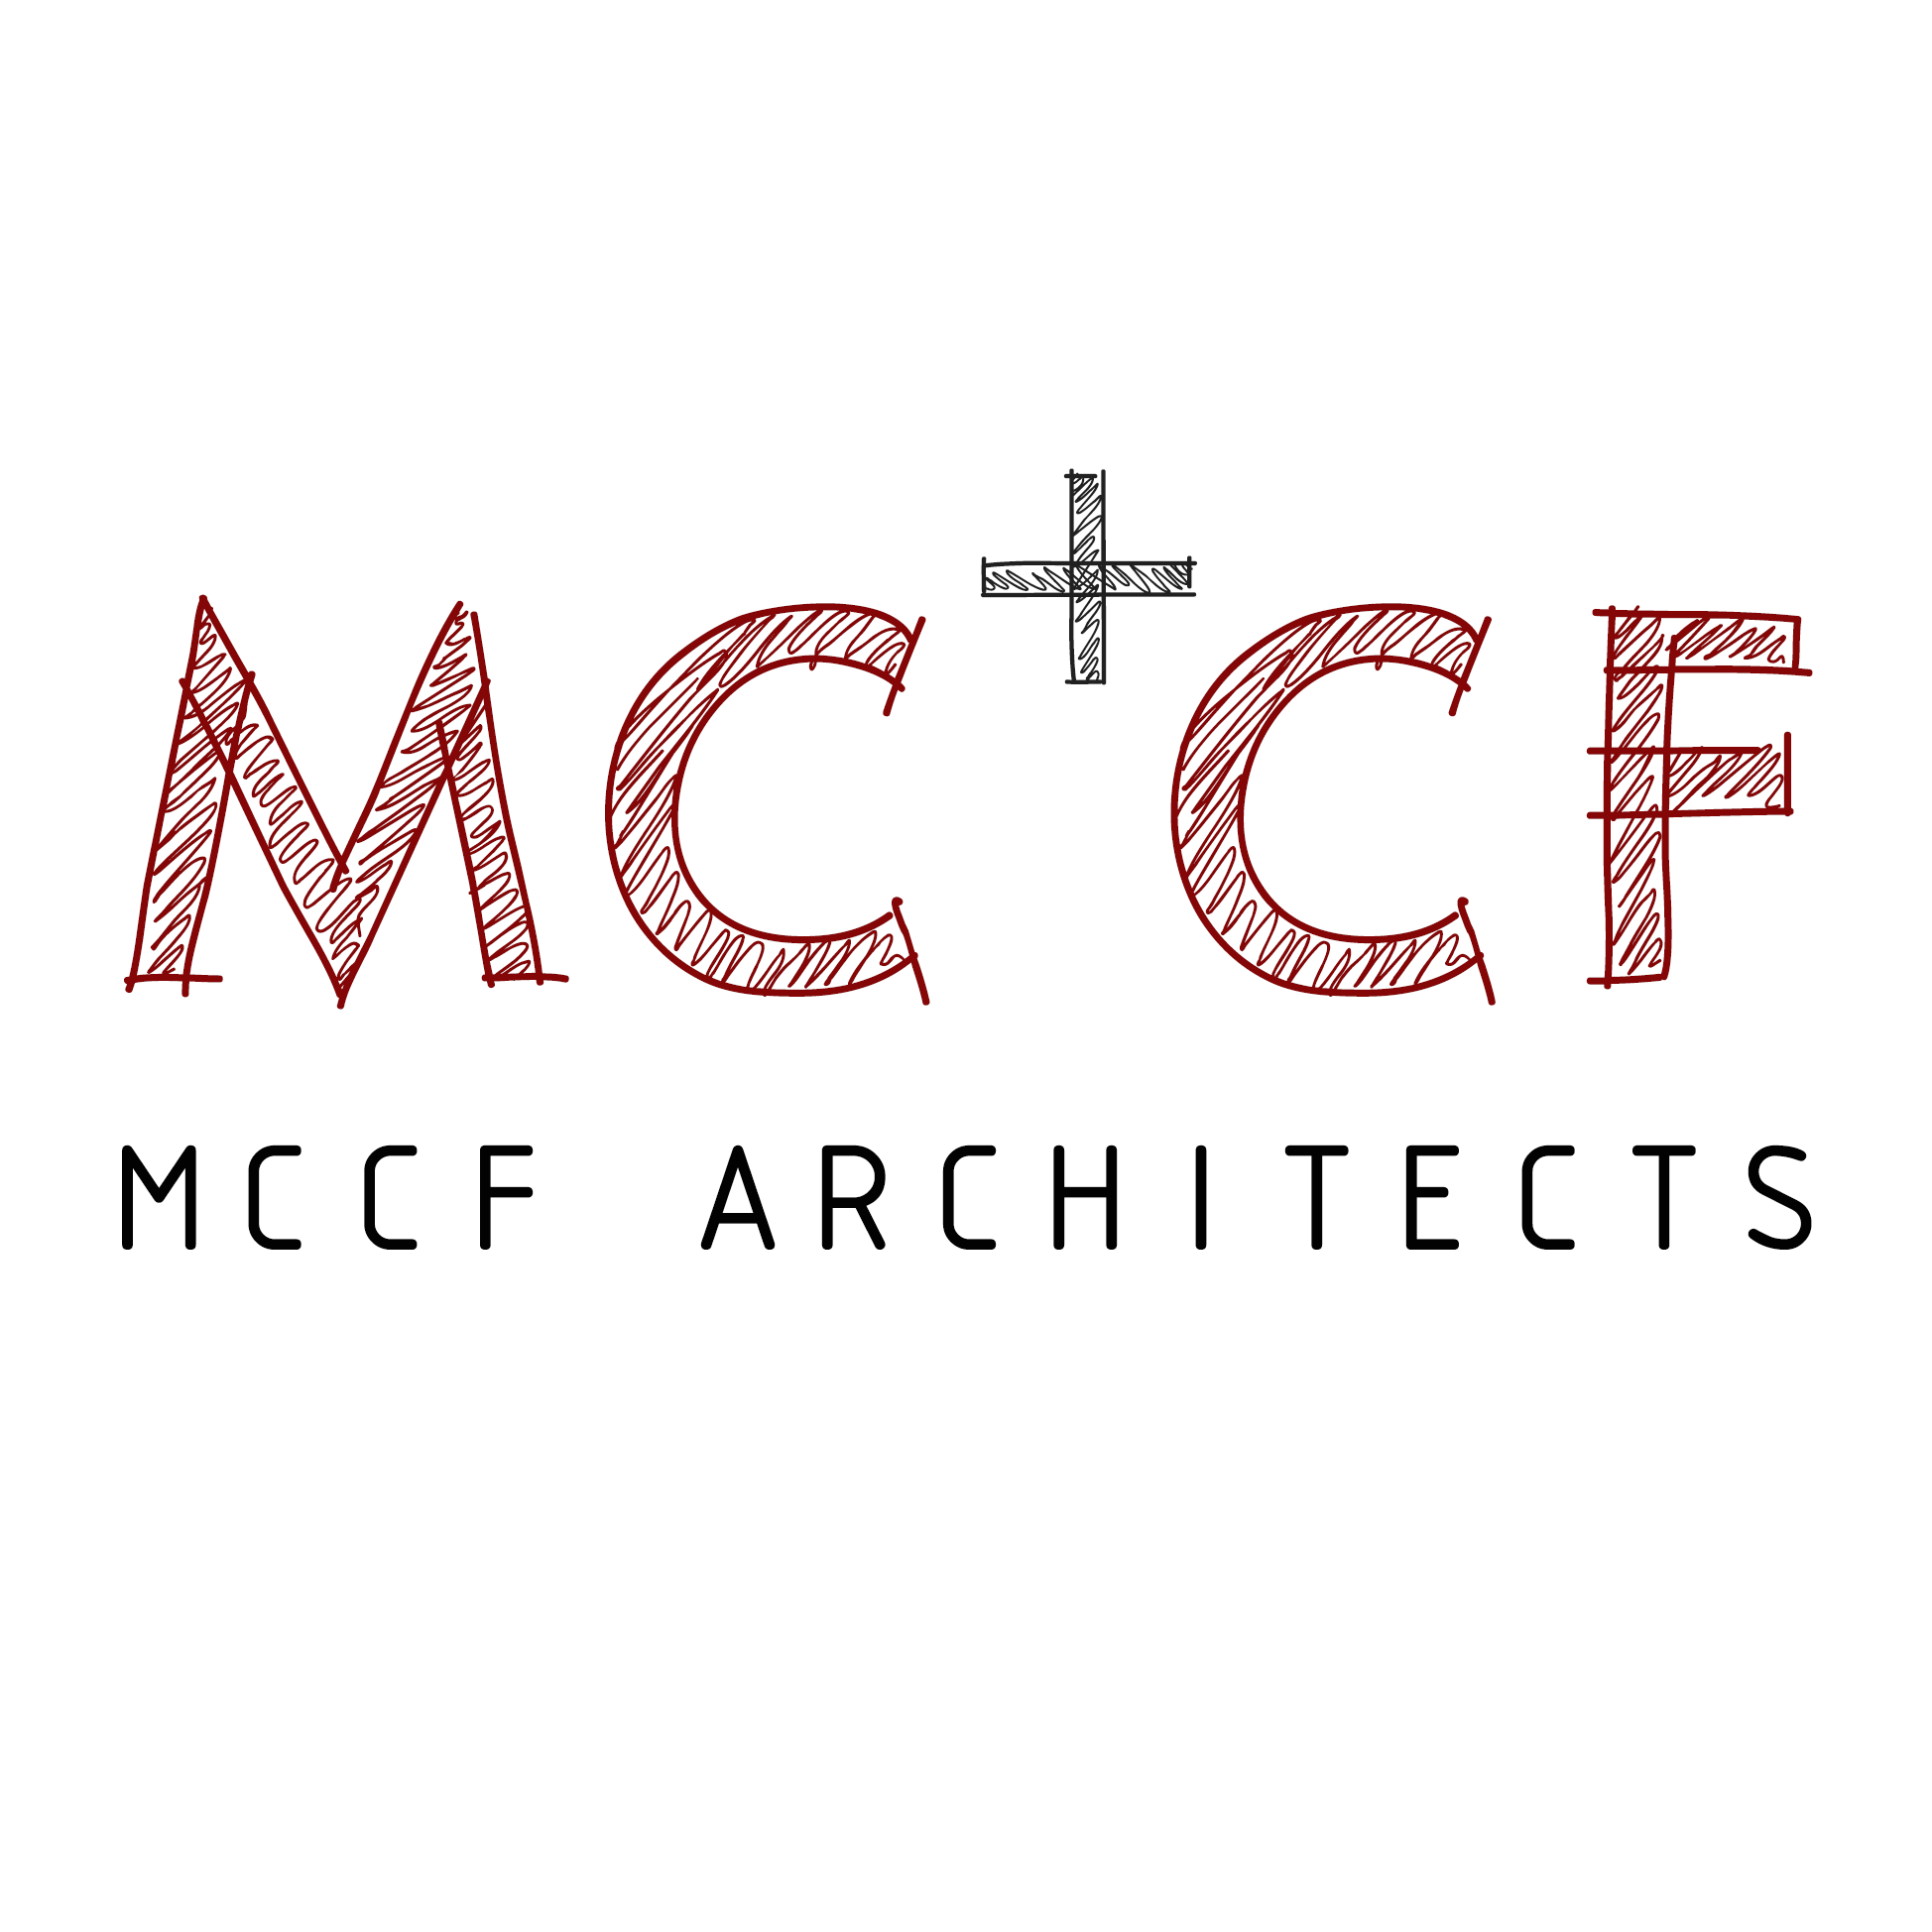 MCCF Architects|IT Services|Professional Services